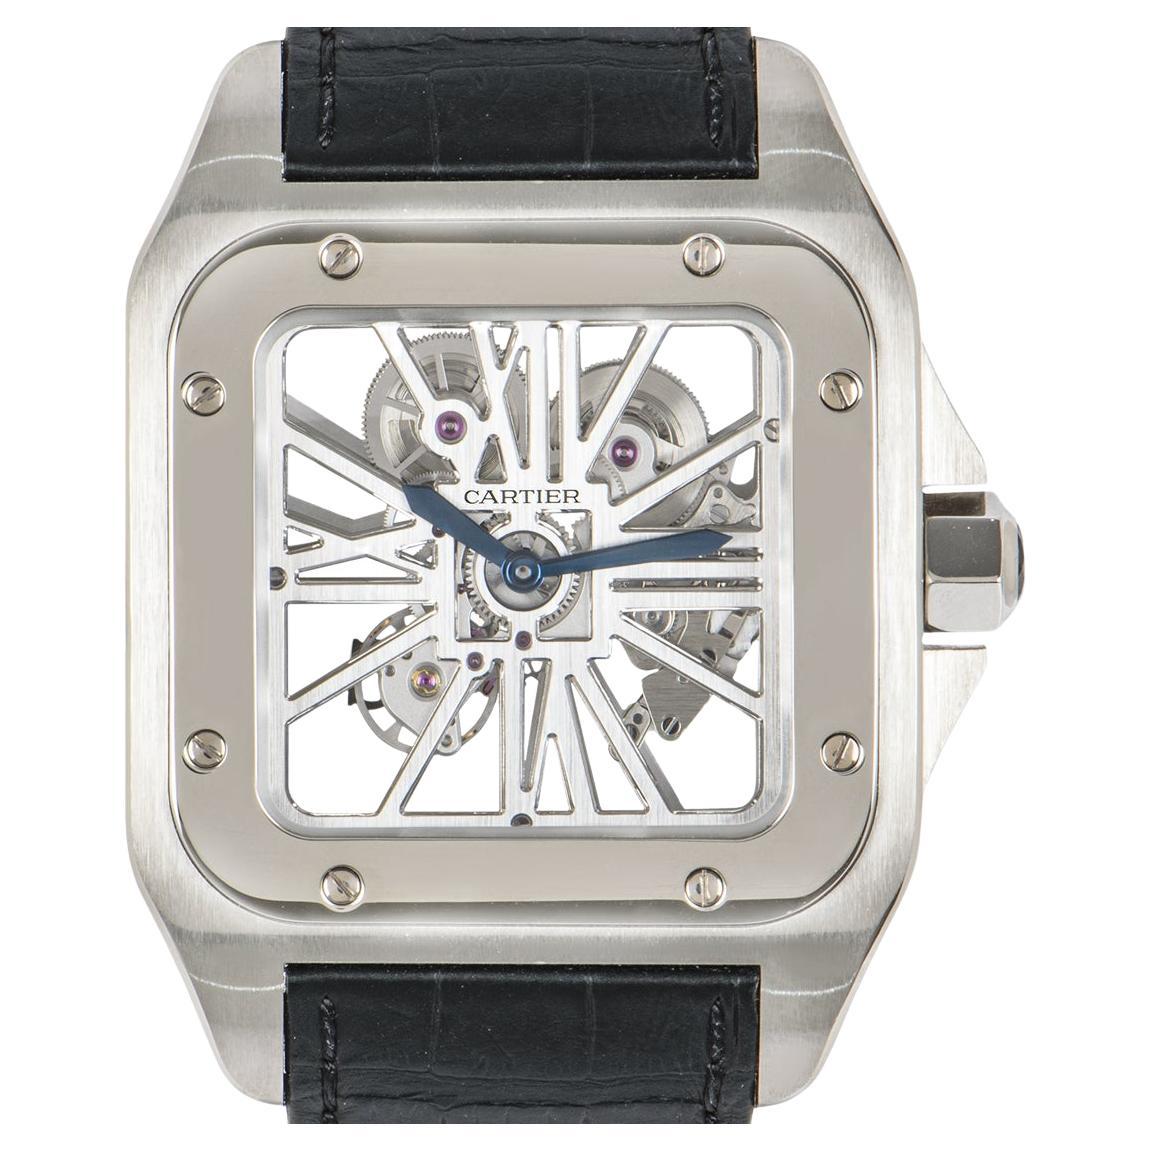 A unique Santos 100XL open skeleton wristwatch crafted in palladium by Cartier. Featuring a stunning skeleton dial that gives you a closer look at the mechanical function of this timepiece. Which can be further admired from the see-through case